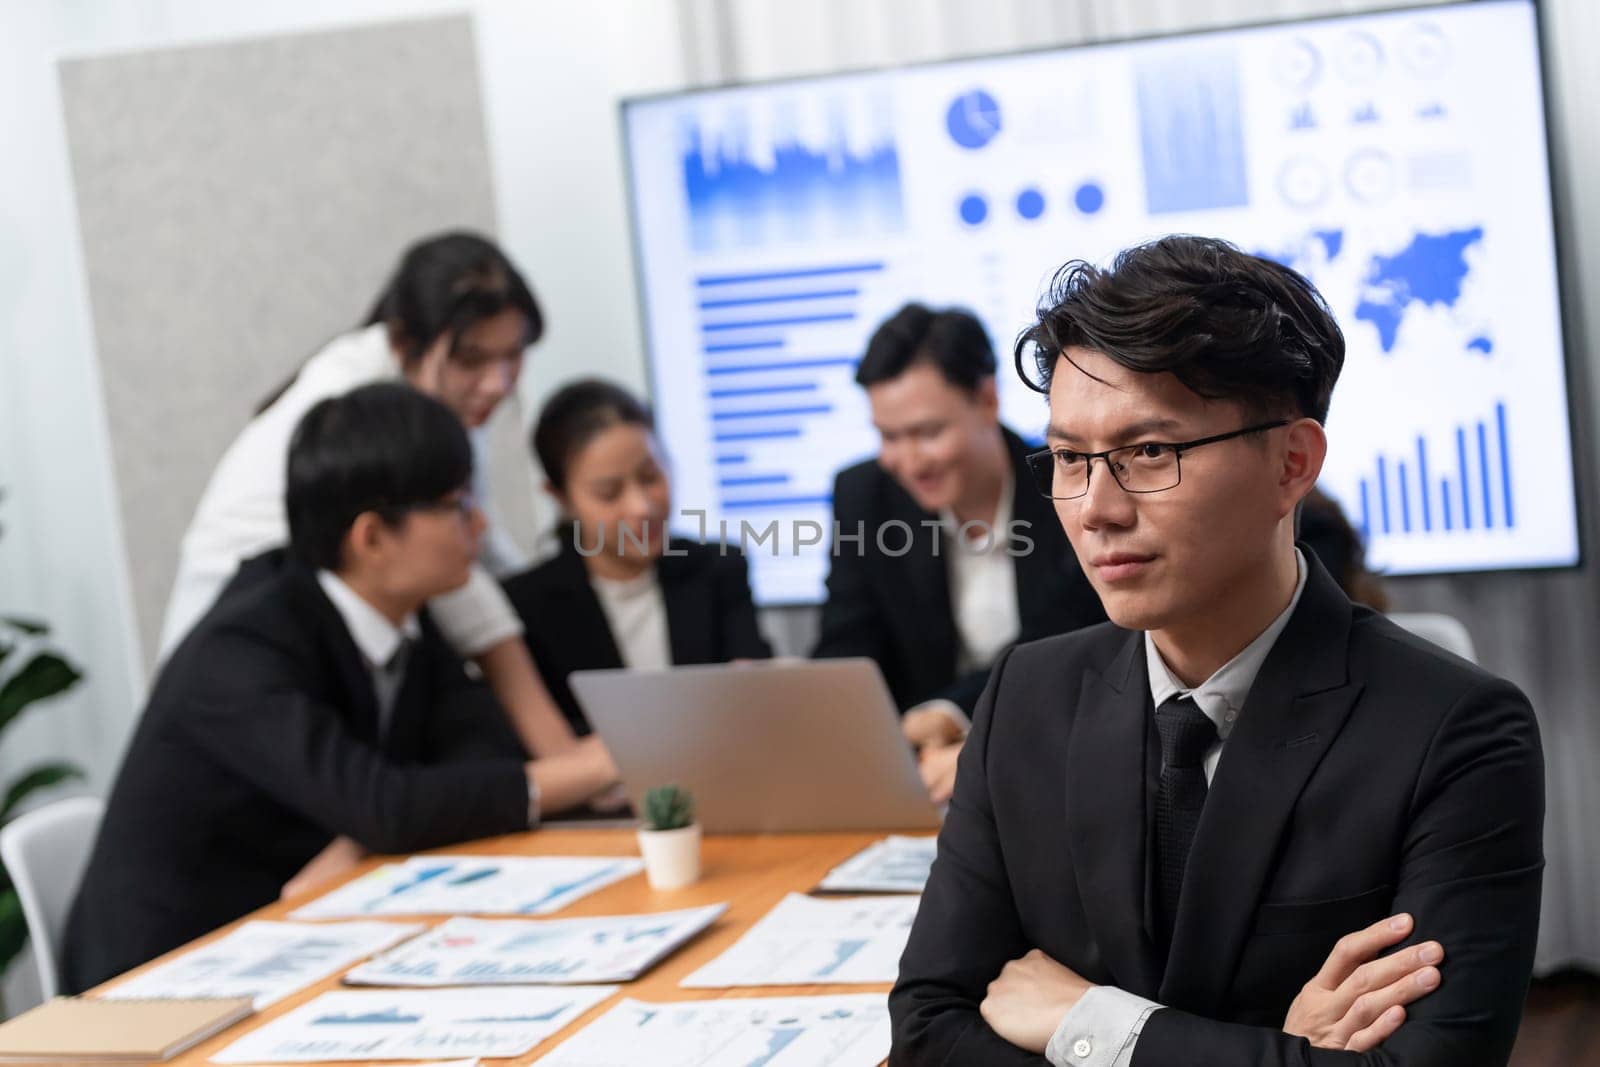 Focus portrait of successful confident male manager or executive in business wear with blurred background of businesspeople, colleagues working with financial report papers in office of harmony.